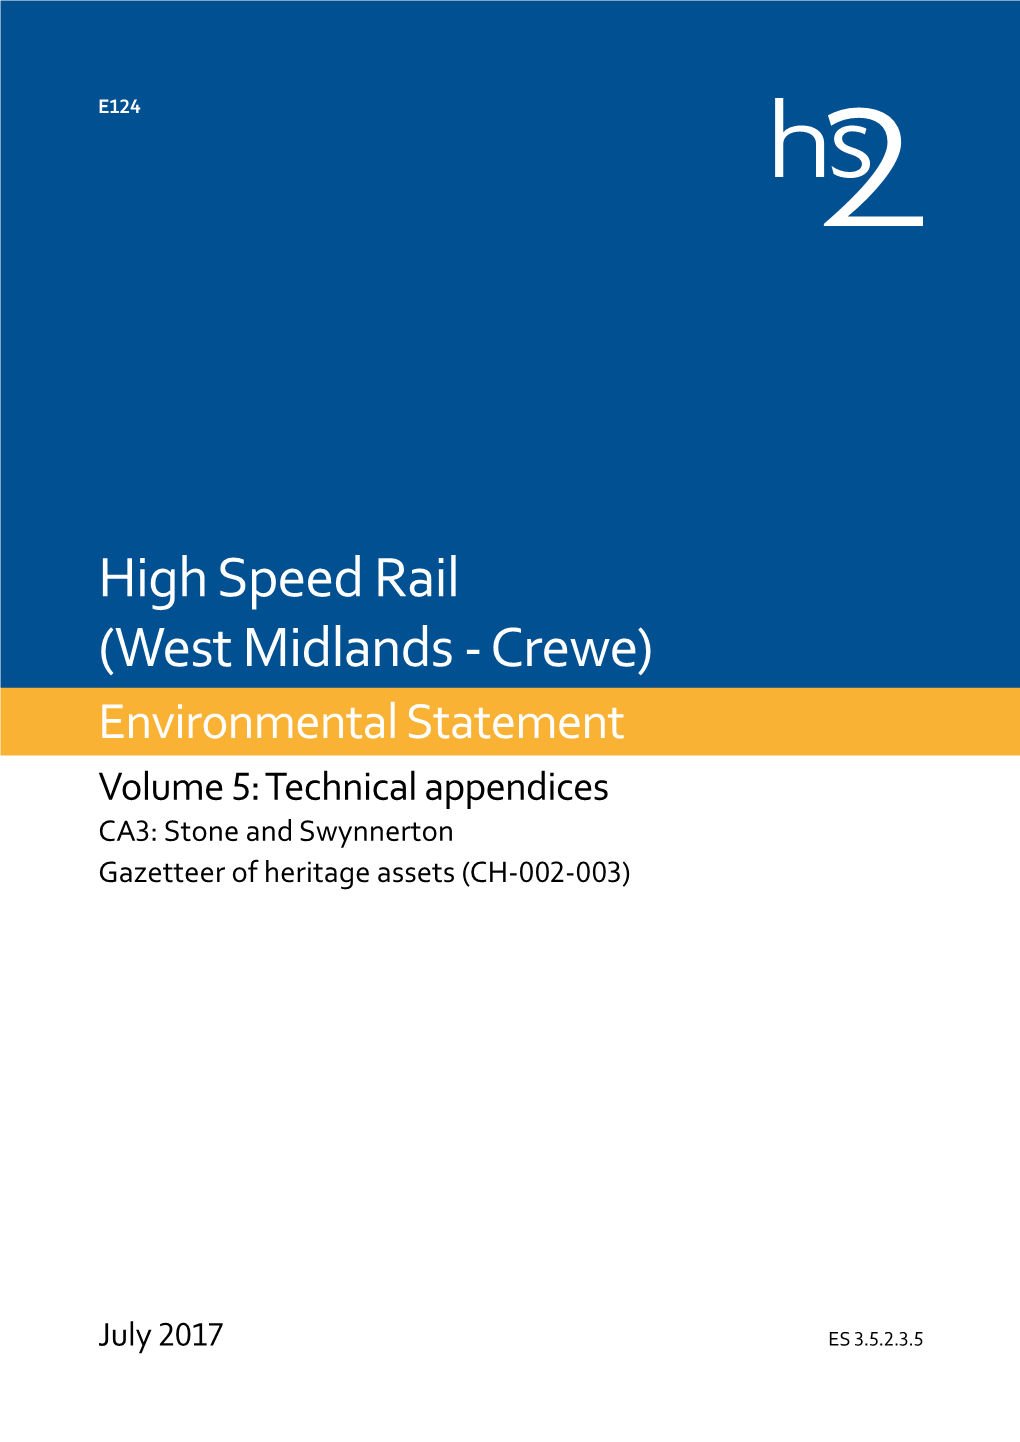 High Speed Rail (West Midlands - Crewe) Environmental Statement Volume 5: Technical Appendices CA3: Stone and Swynnerton Gazetteer of Heritage Assets (CH-002-003)